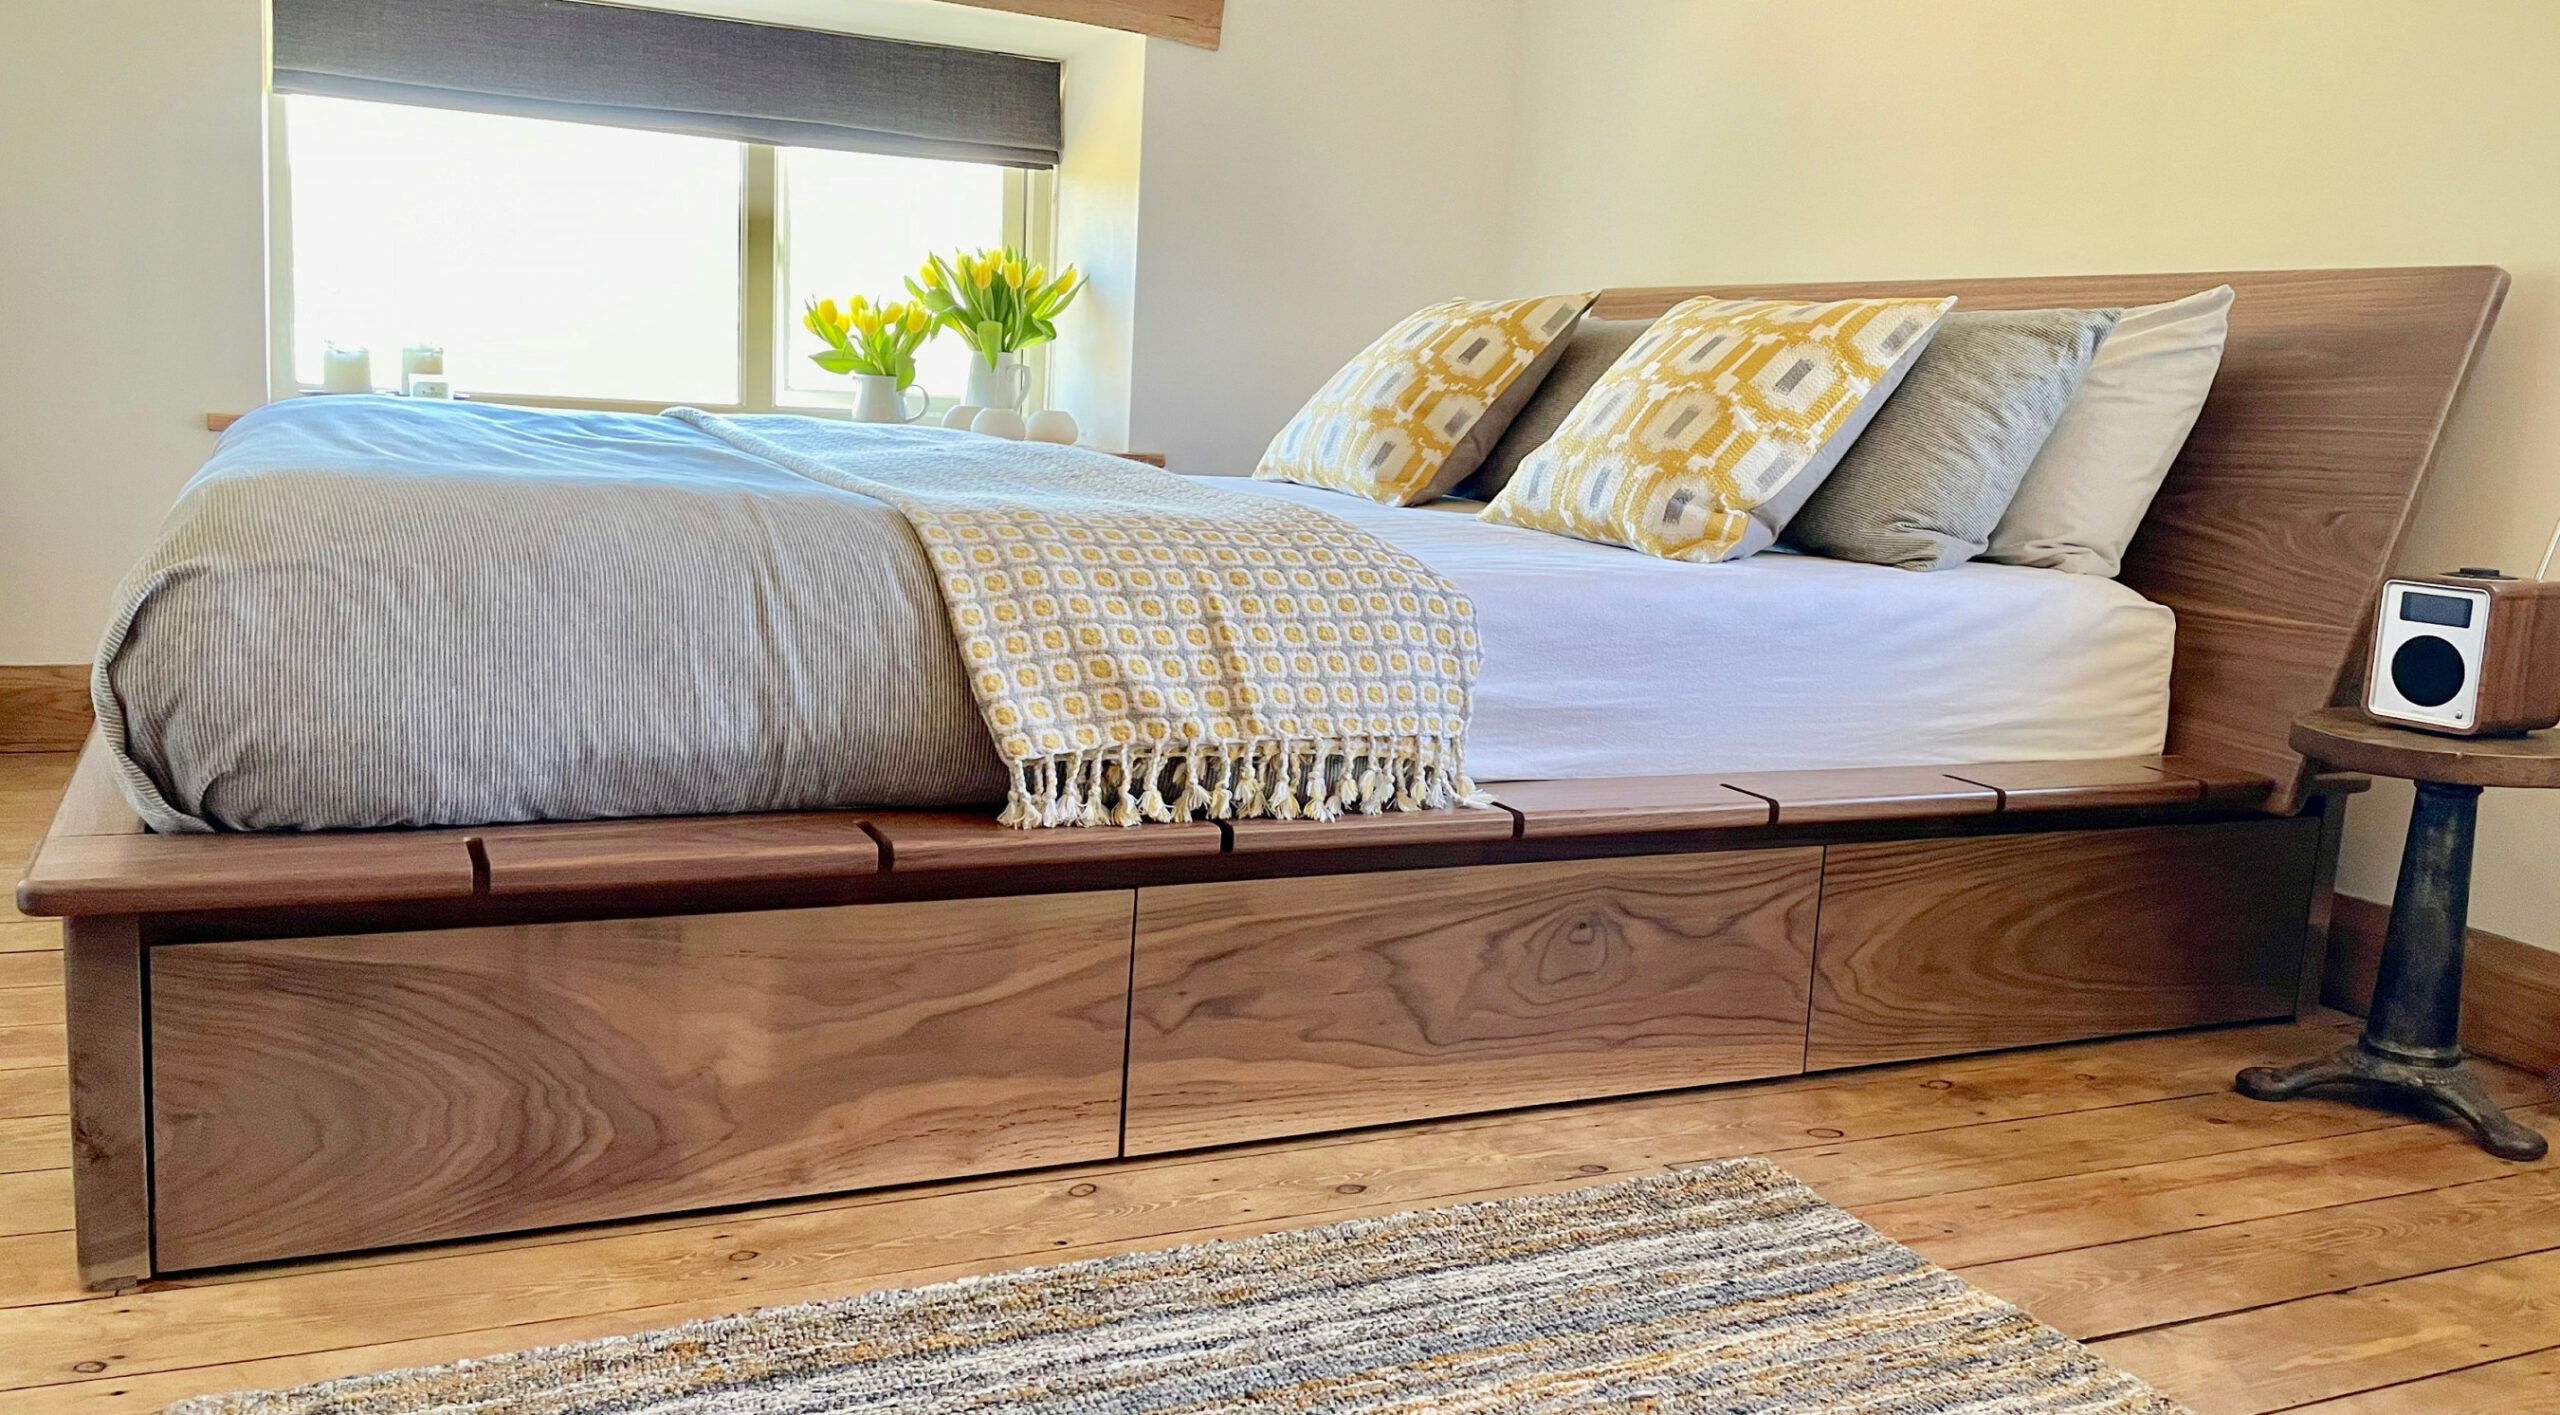 King Size Beds With Storage